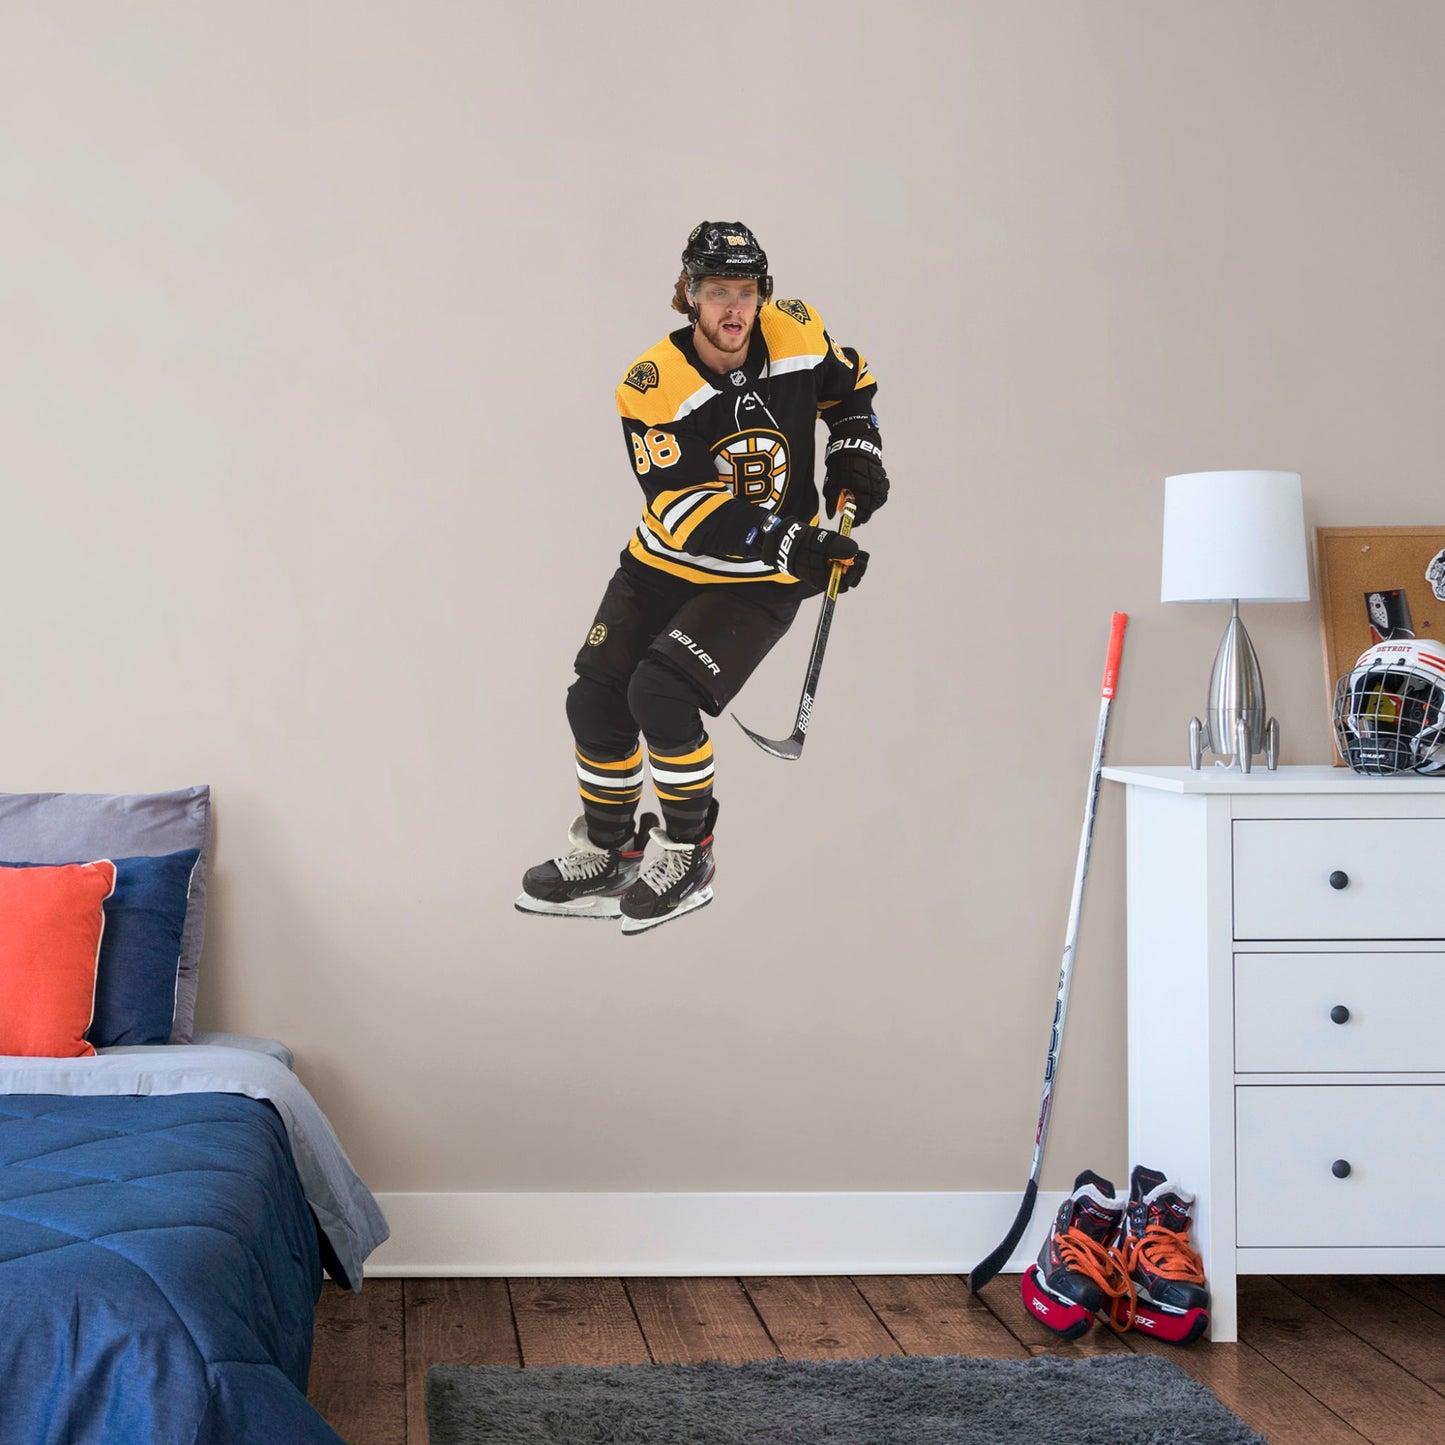 Giant Athlete + 2 Decals (27"W x 51"H) He was the B's first-round pick in the 2014 NHL draft, and “Pasta” has since become one of the league’s most prolific scorers. Bring the action into the game room, living room or locker room with this officially licensed NHL wall decal featuring Boston Bruins player David Pastrnak poised to skate into action.